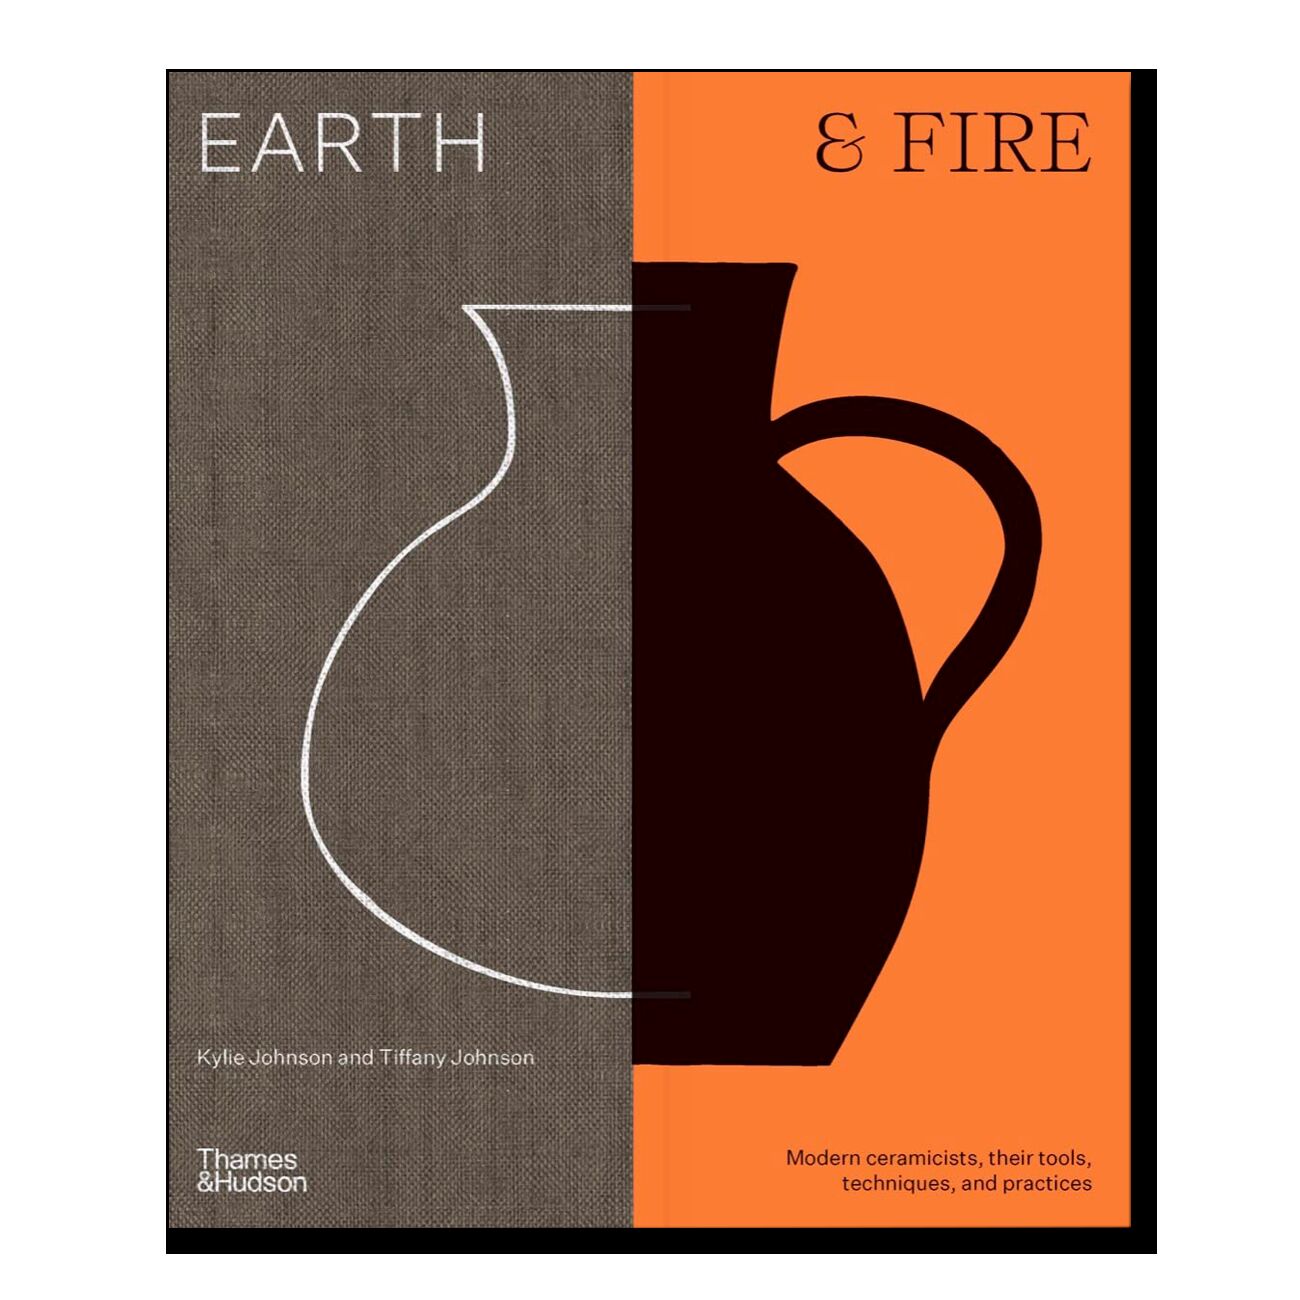 Earth & Fire: Modern Ceramicists, Their Tools, Techniques, and Practice